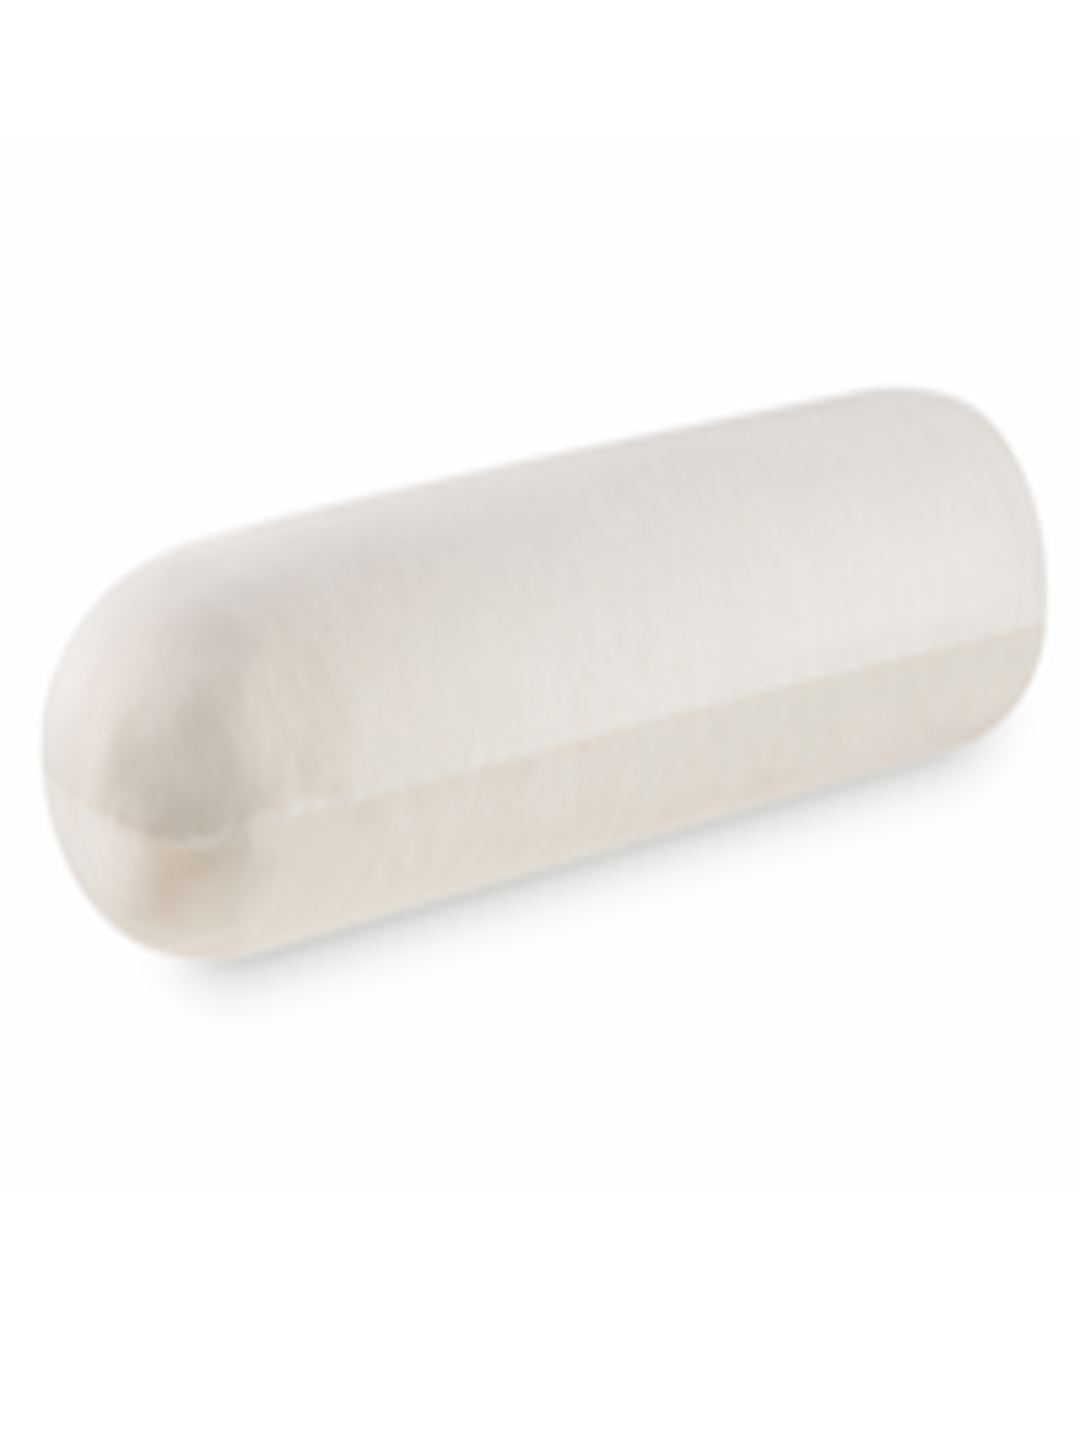 Buy The White Willow Off White Round Memory Foam Bolster -  - Home for Unisex